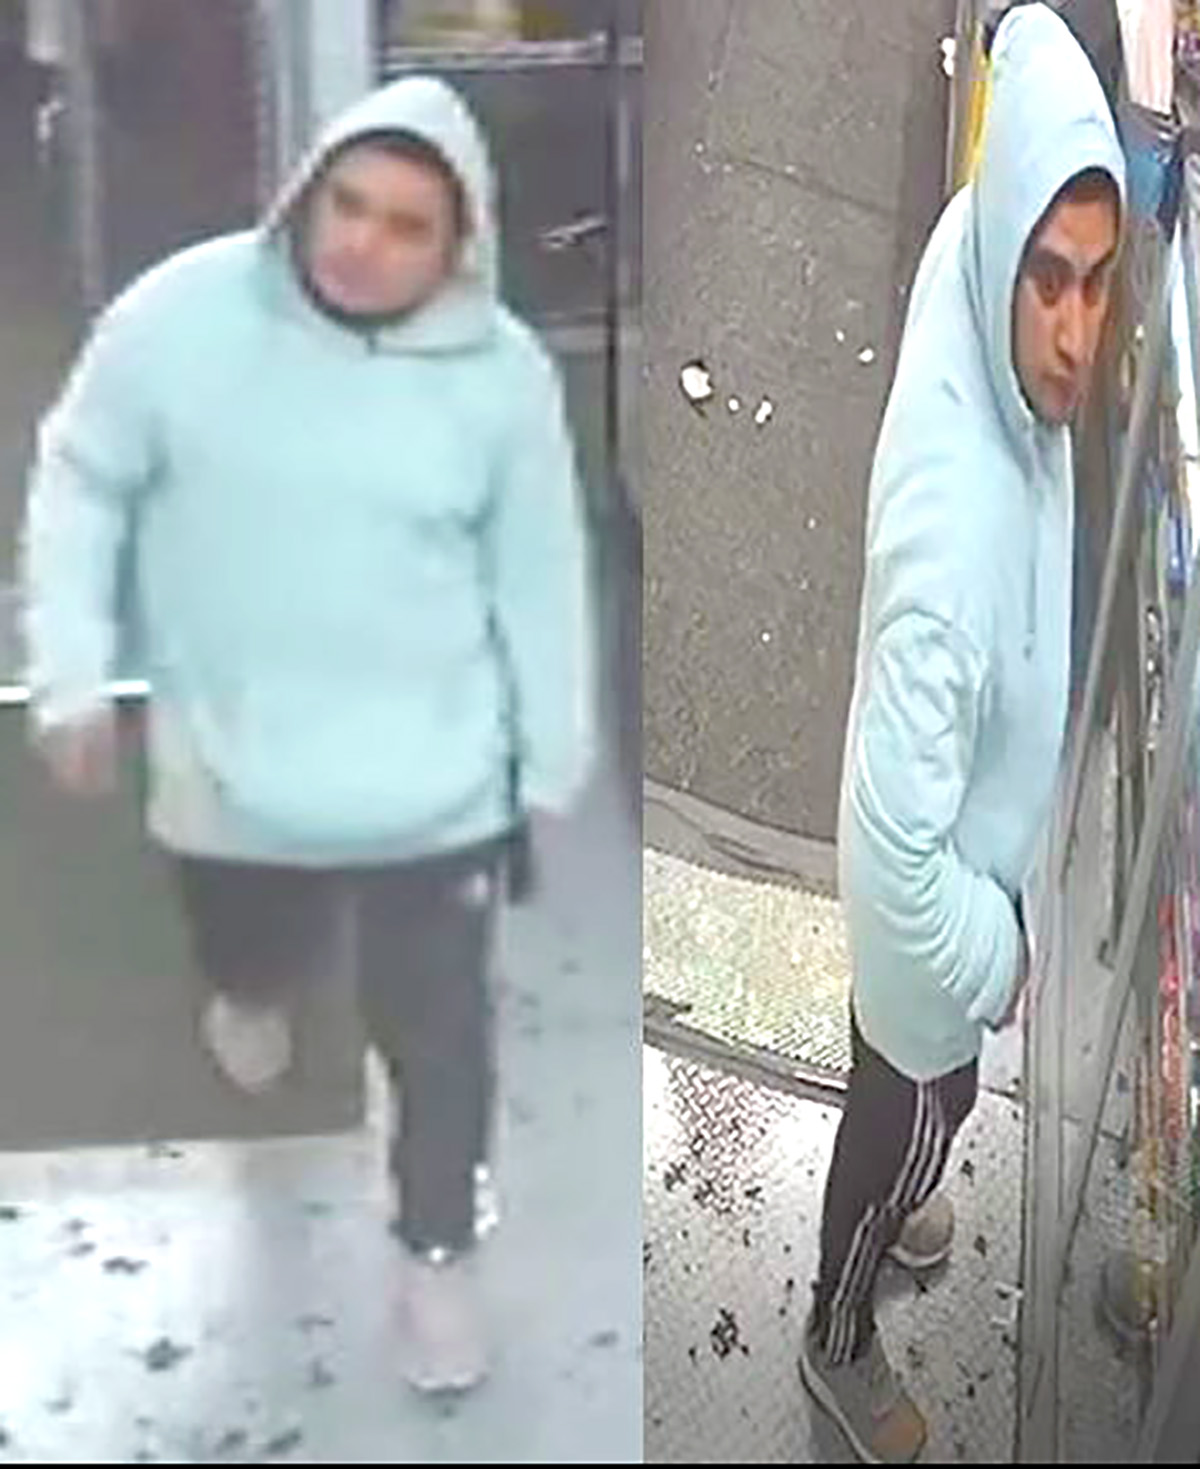 The NYPD is searching for this man in connection with a sexual assault in Queens. -Photo by NYPD